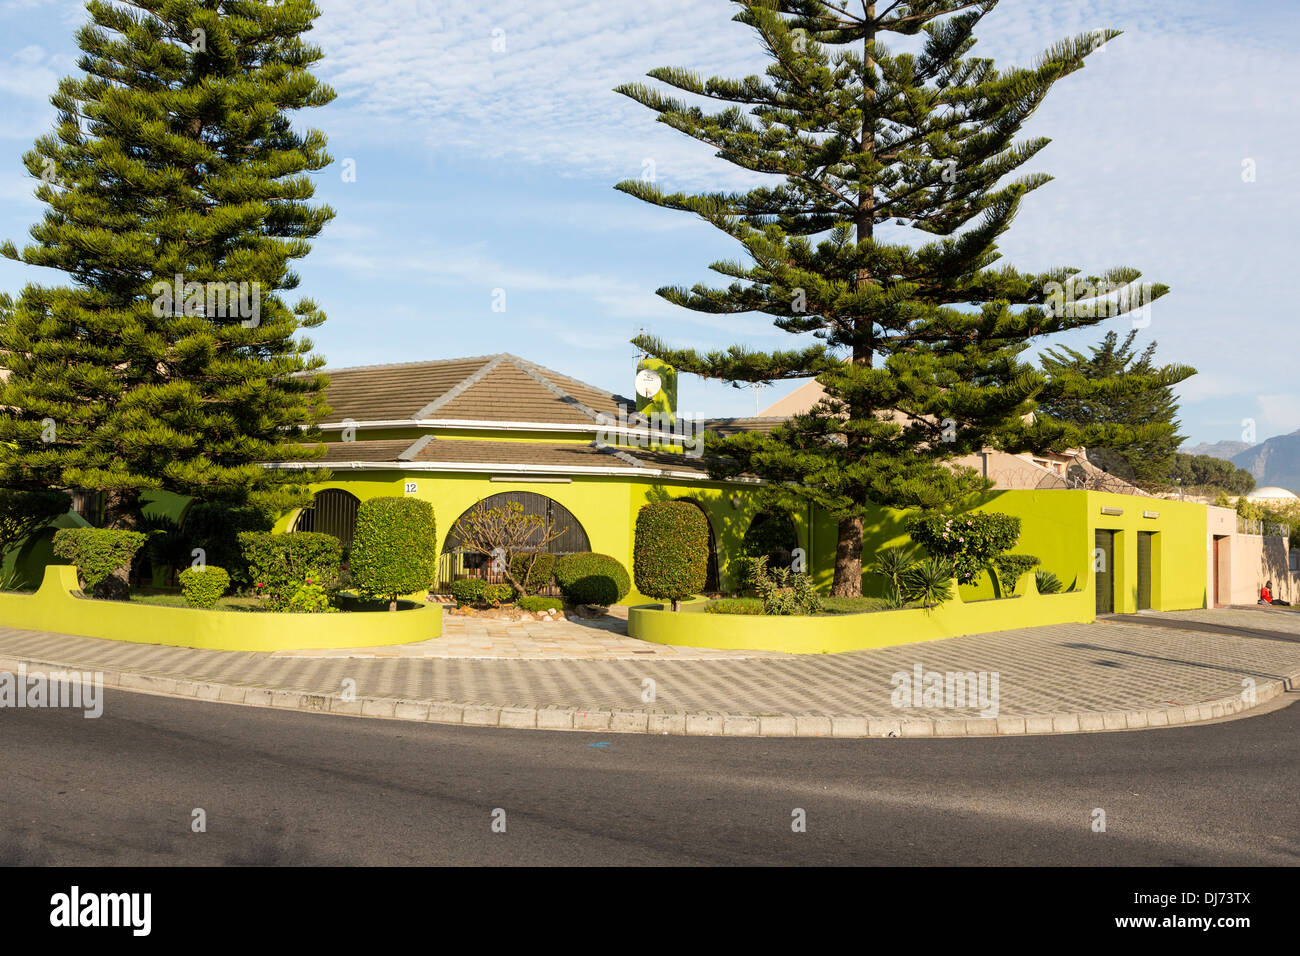 South Africa, Cape Town, Athlone Suburb. Private Home. Stock Photo